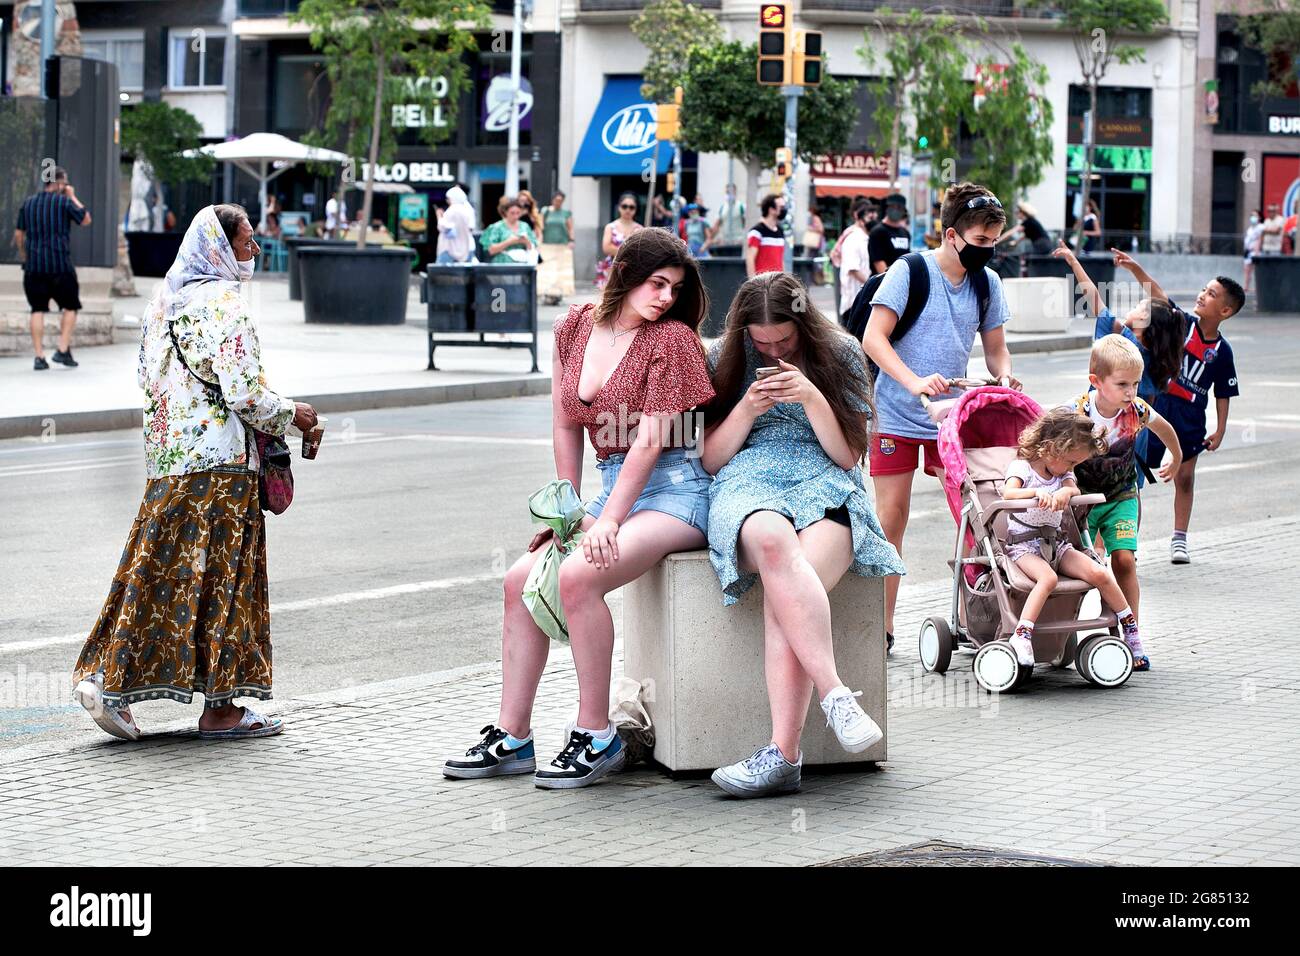 Teenage girls looking at their selfies and a Romanian gypsy woman on the prowl, Sagrada Familia, Barcelona, Spain. Stock Photo